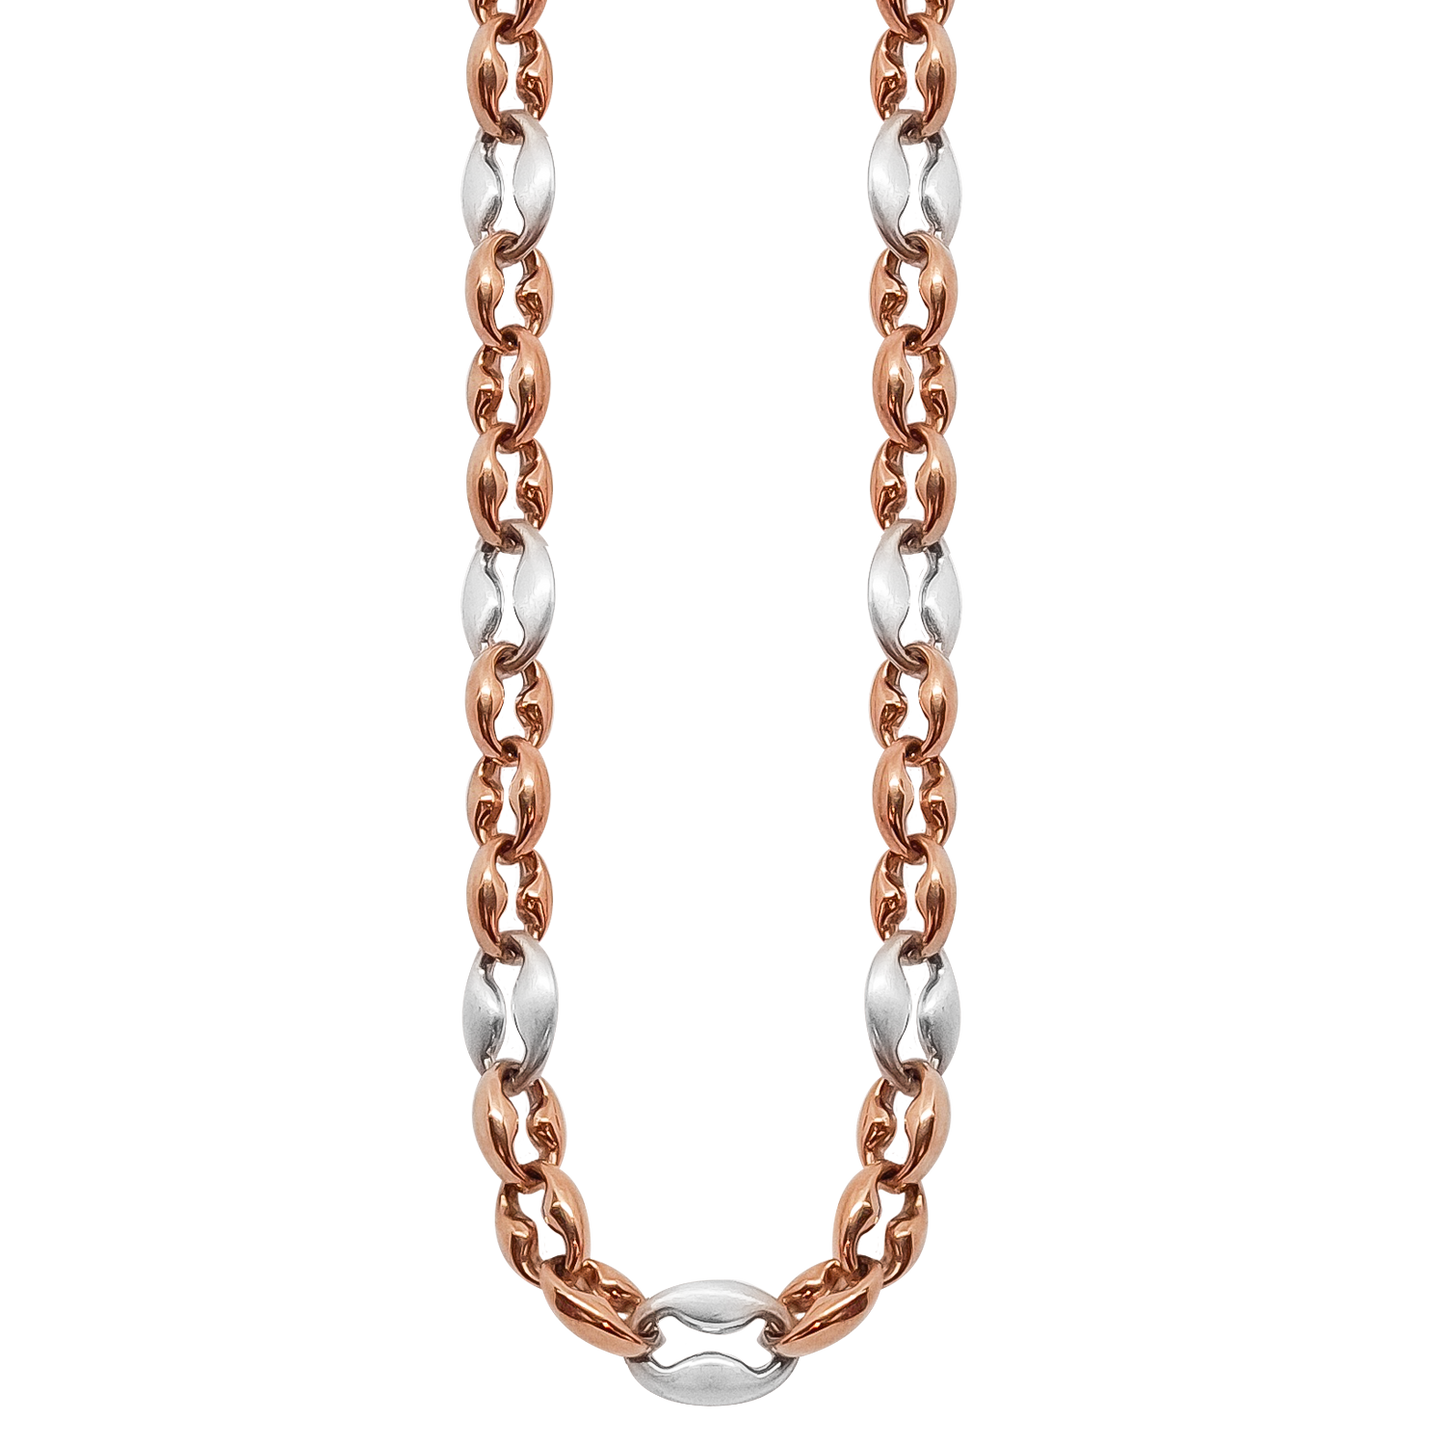 Gucci Link Chain in 9ct Two Tone Gold in hollow tubes for a lighter weight on your neck.